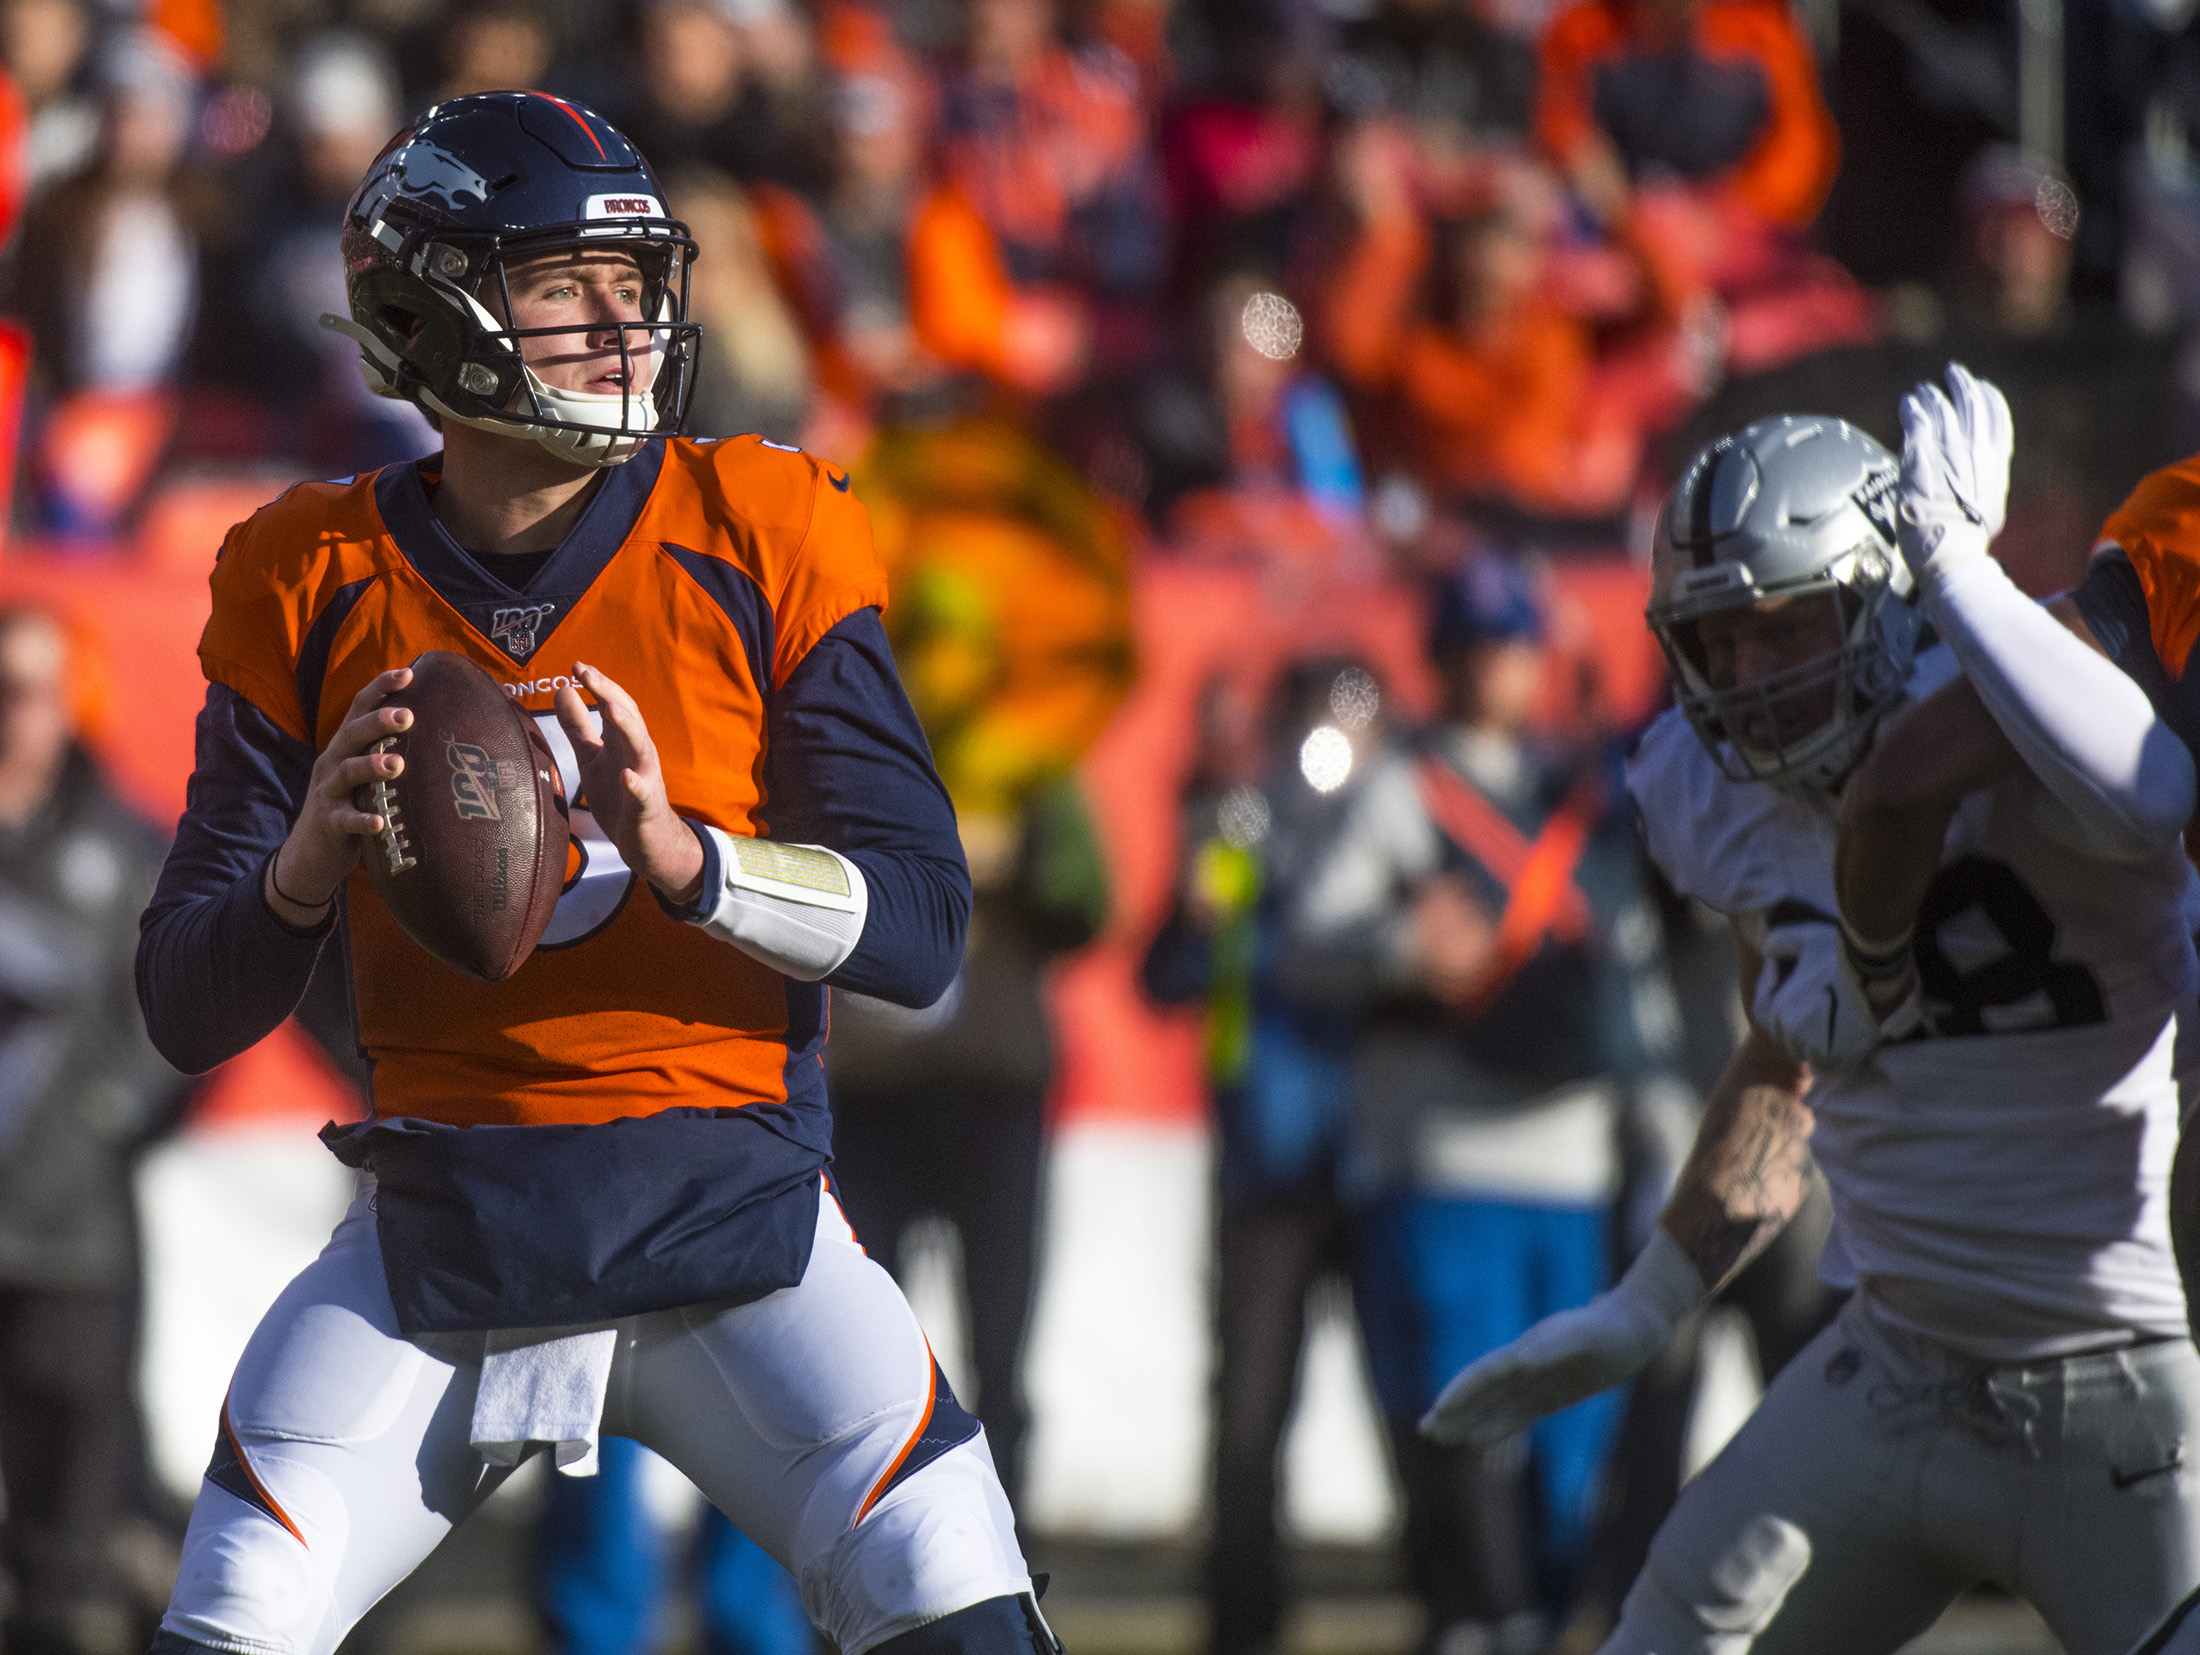 Drew Lock of the Denver Broncos at Empower Field at Mile High on Dec. 29, 2019, during a game against the Oakland Raiders.